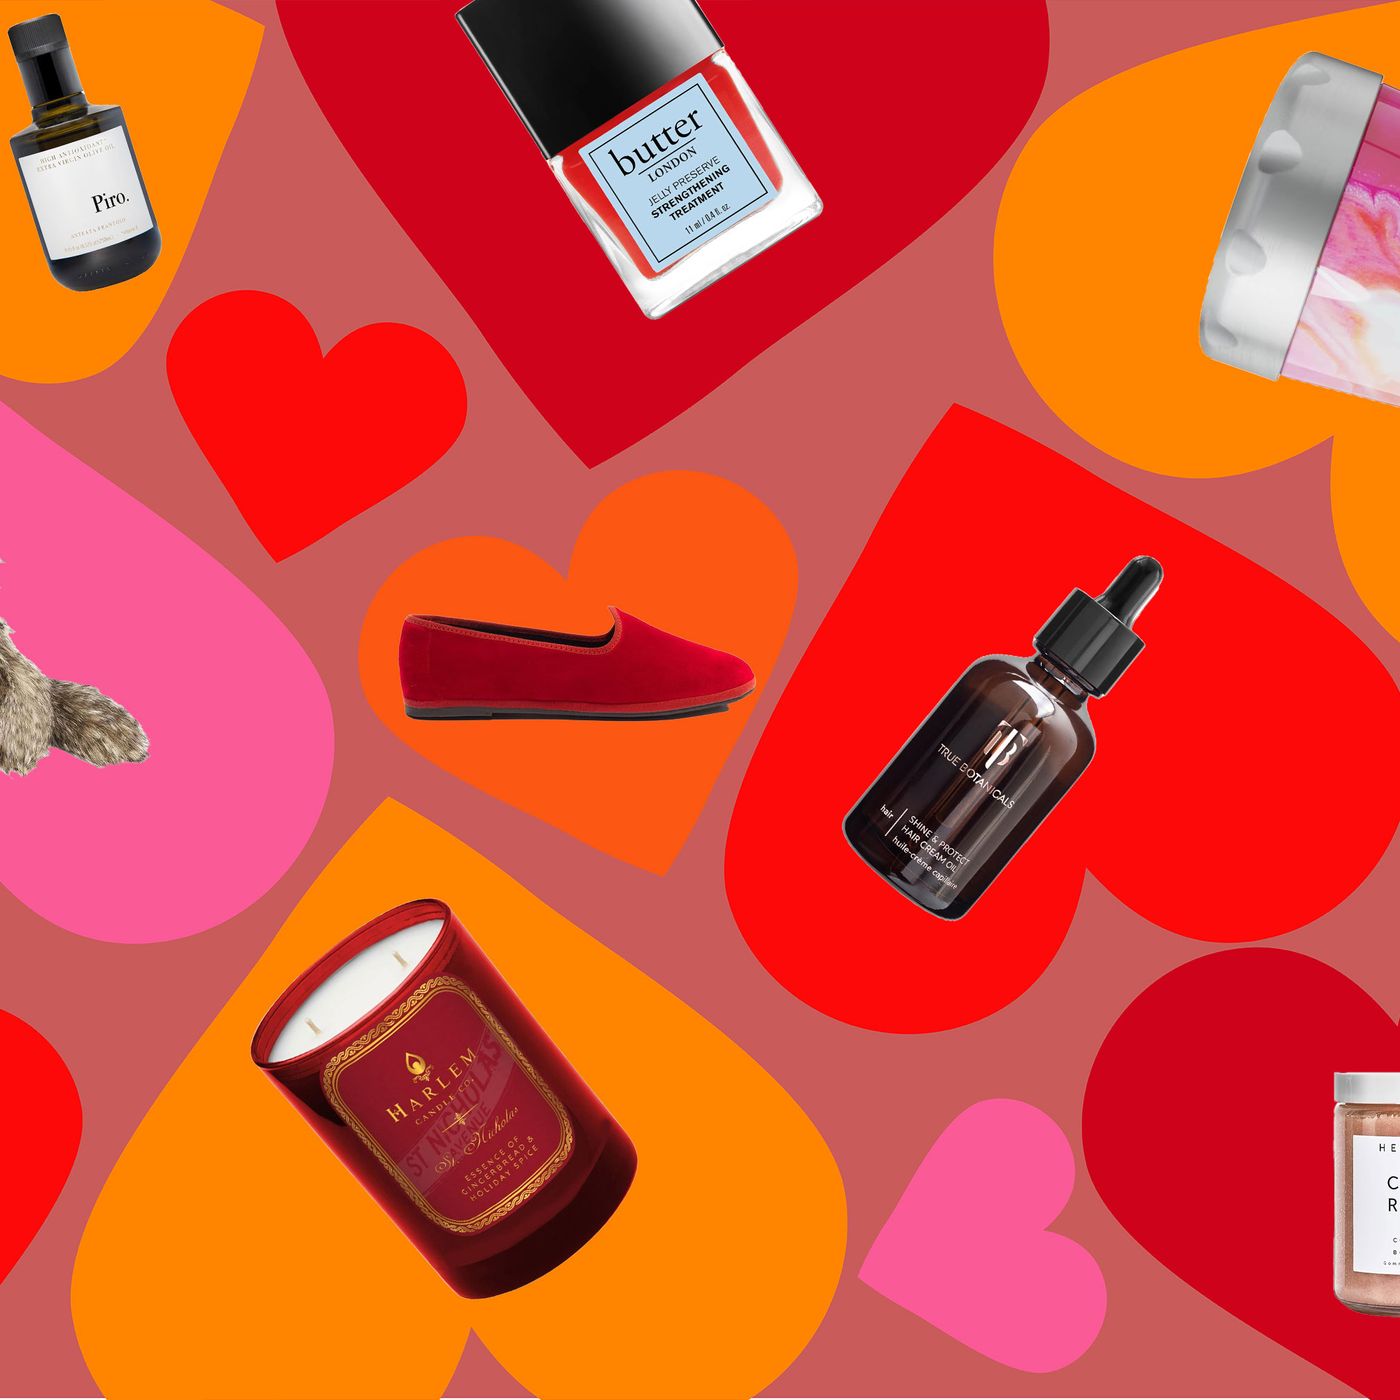 Valentine's Day Gifts to Fit Their Snack Style